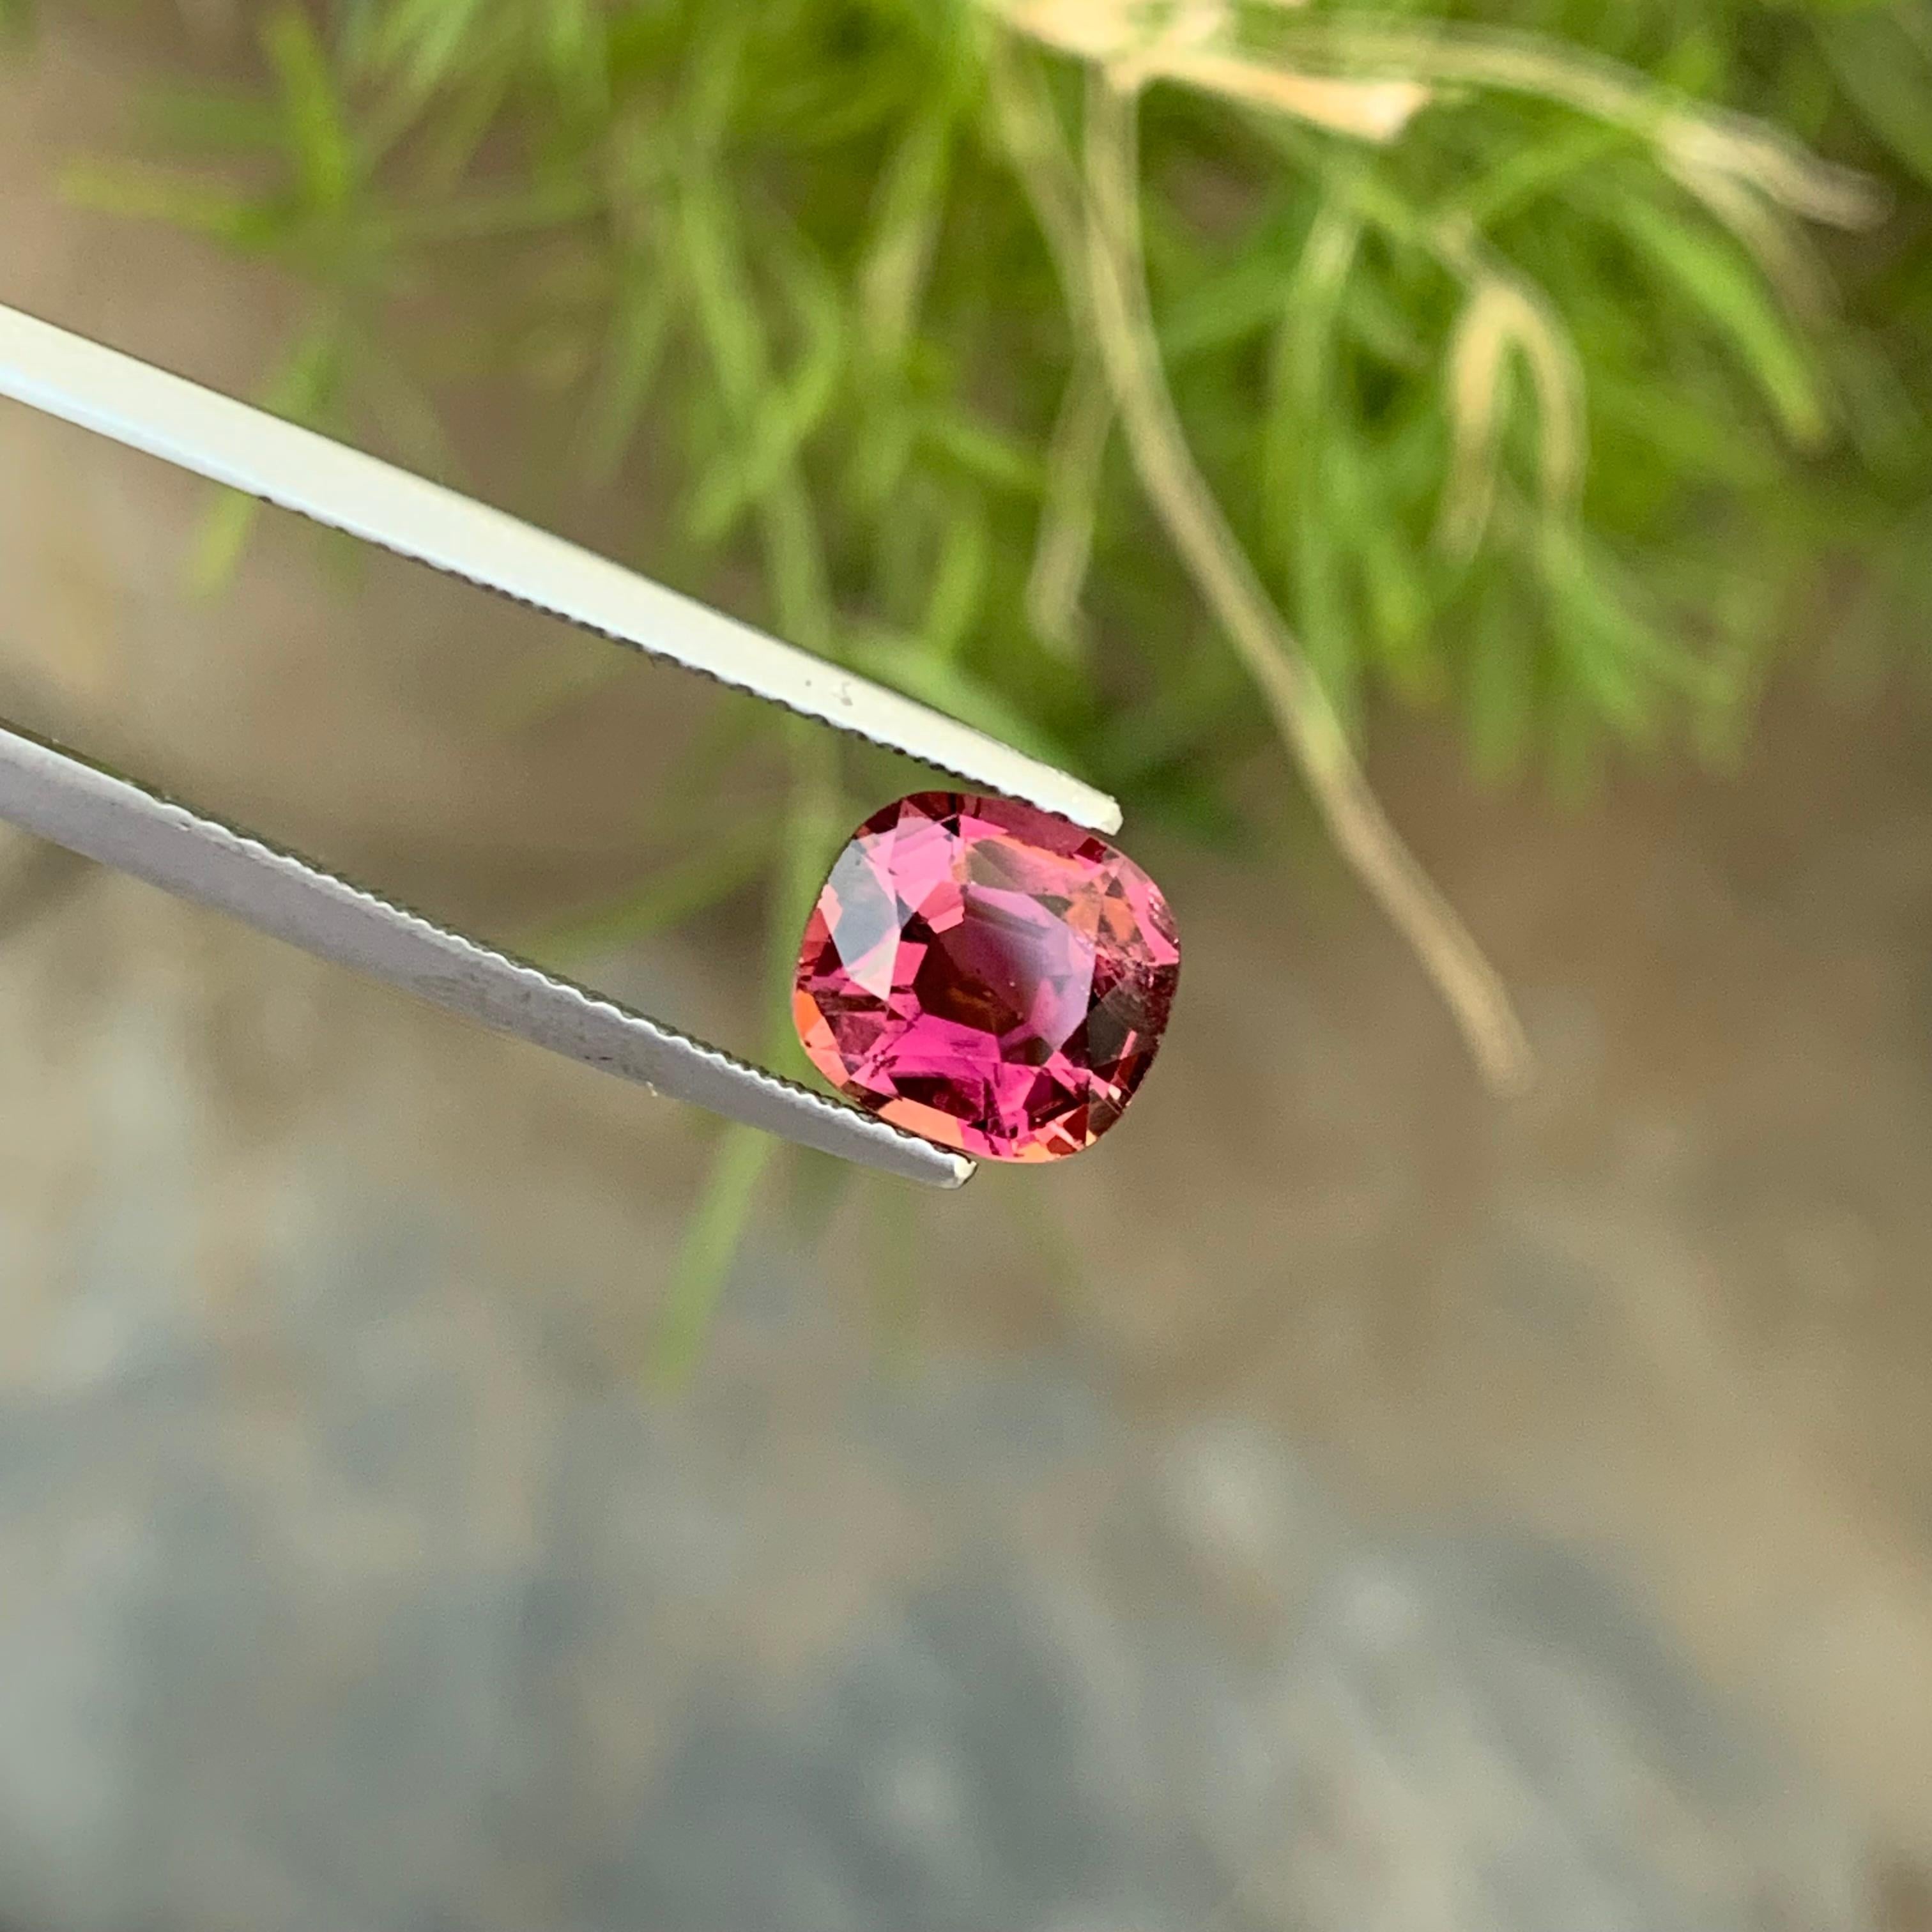 Faceted Tourmaline
Weight: 1.80 Carats
Dimension: 8.1x7.5x4.7 Mm
Origin: Afghanistan
Color: Pink
Shape: Cushion
Clarity: SI
Certificate: On Demand

With a rating between 7 and 7.5 on the Mohs scale of mineral hardness, tourmaline jewelry can be worn